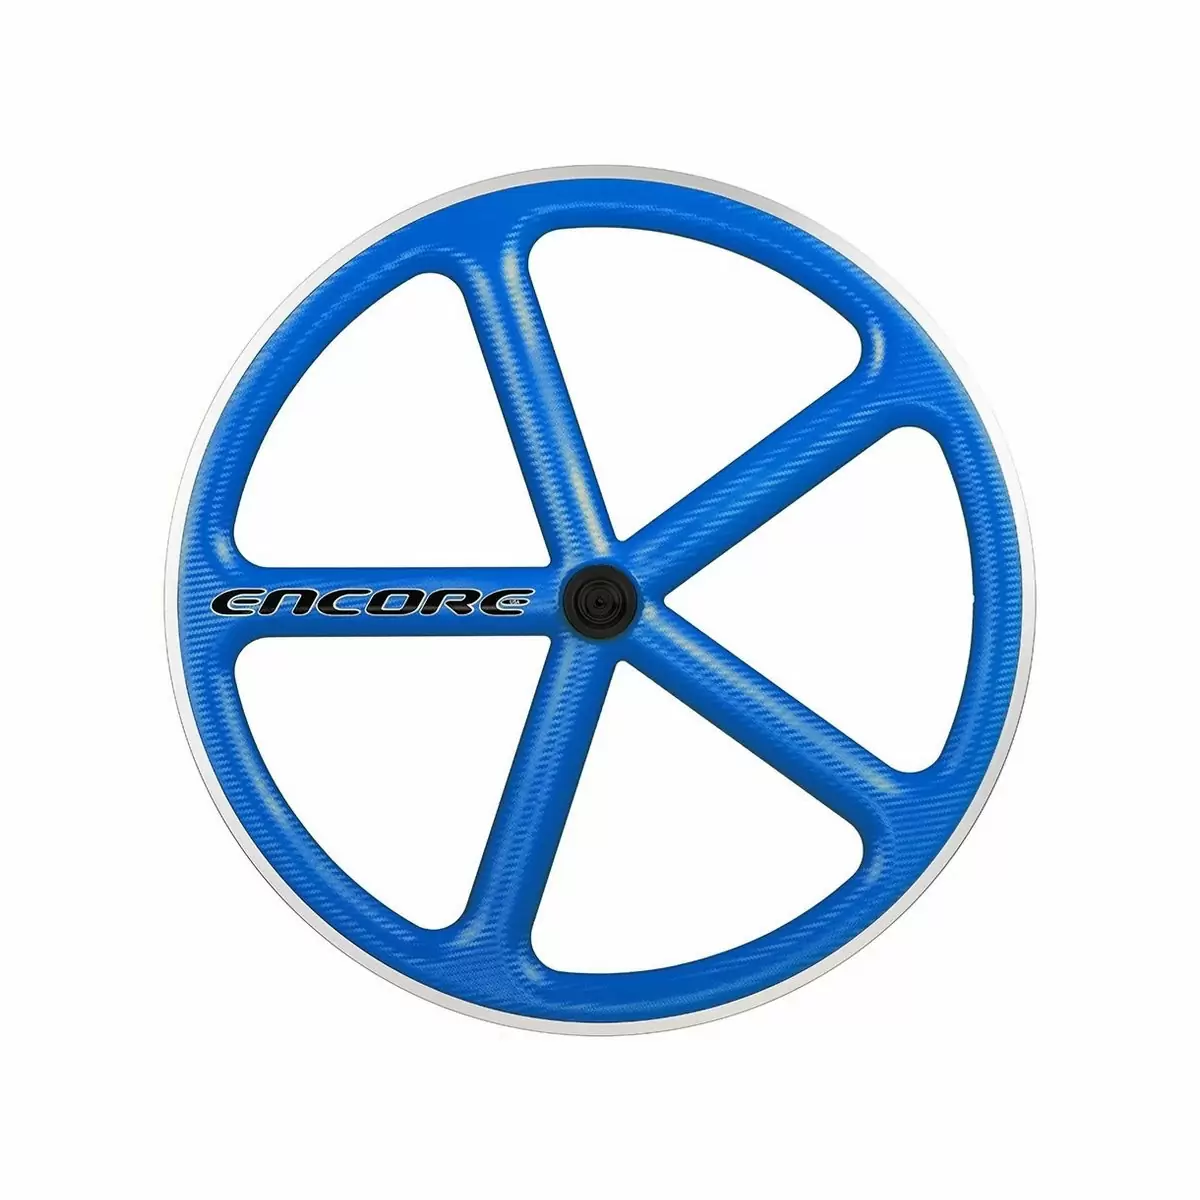 roue avant 700c track 5 rayons carbone tissage bleu msw - image